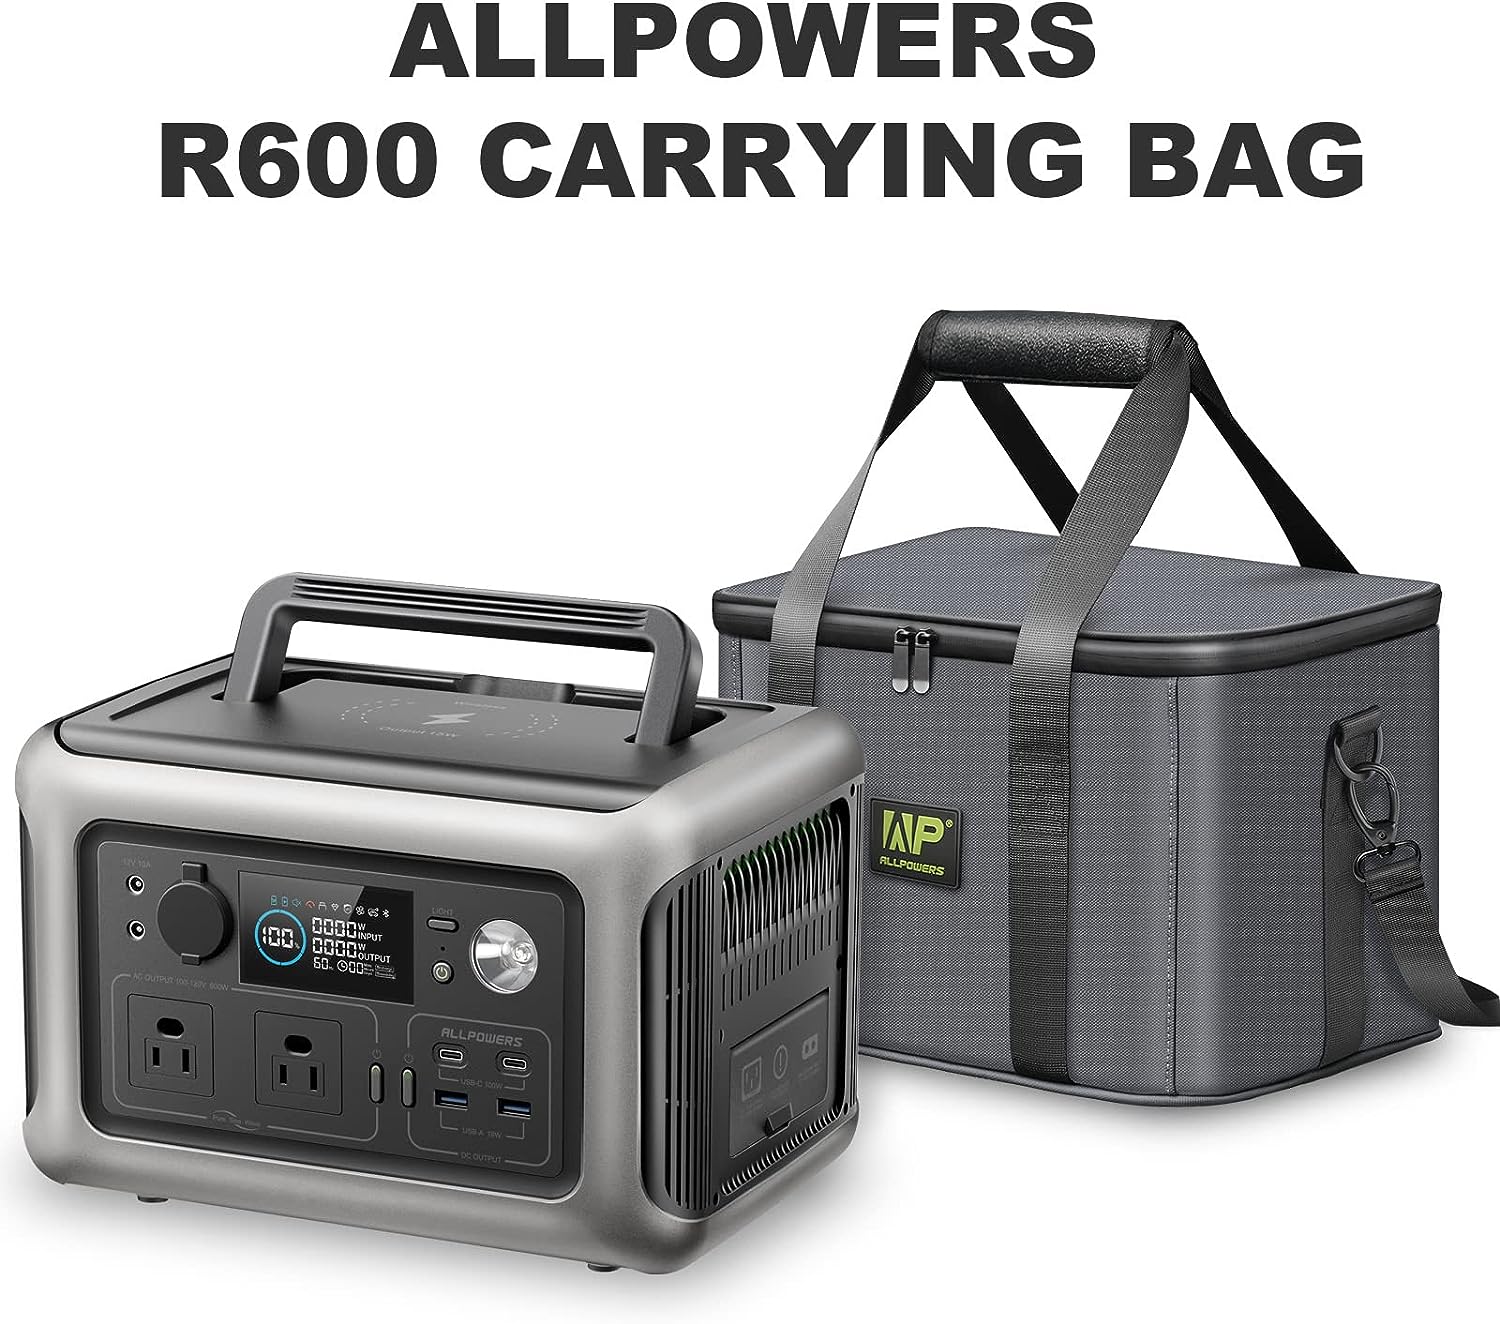 ALLPOWERS Portable Carry Bag for R600 Portable Power Station